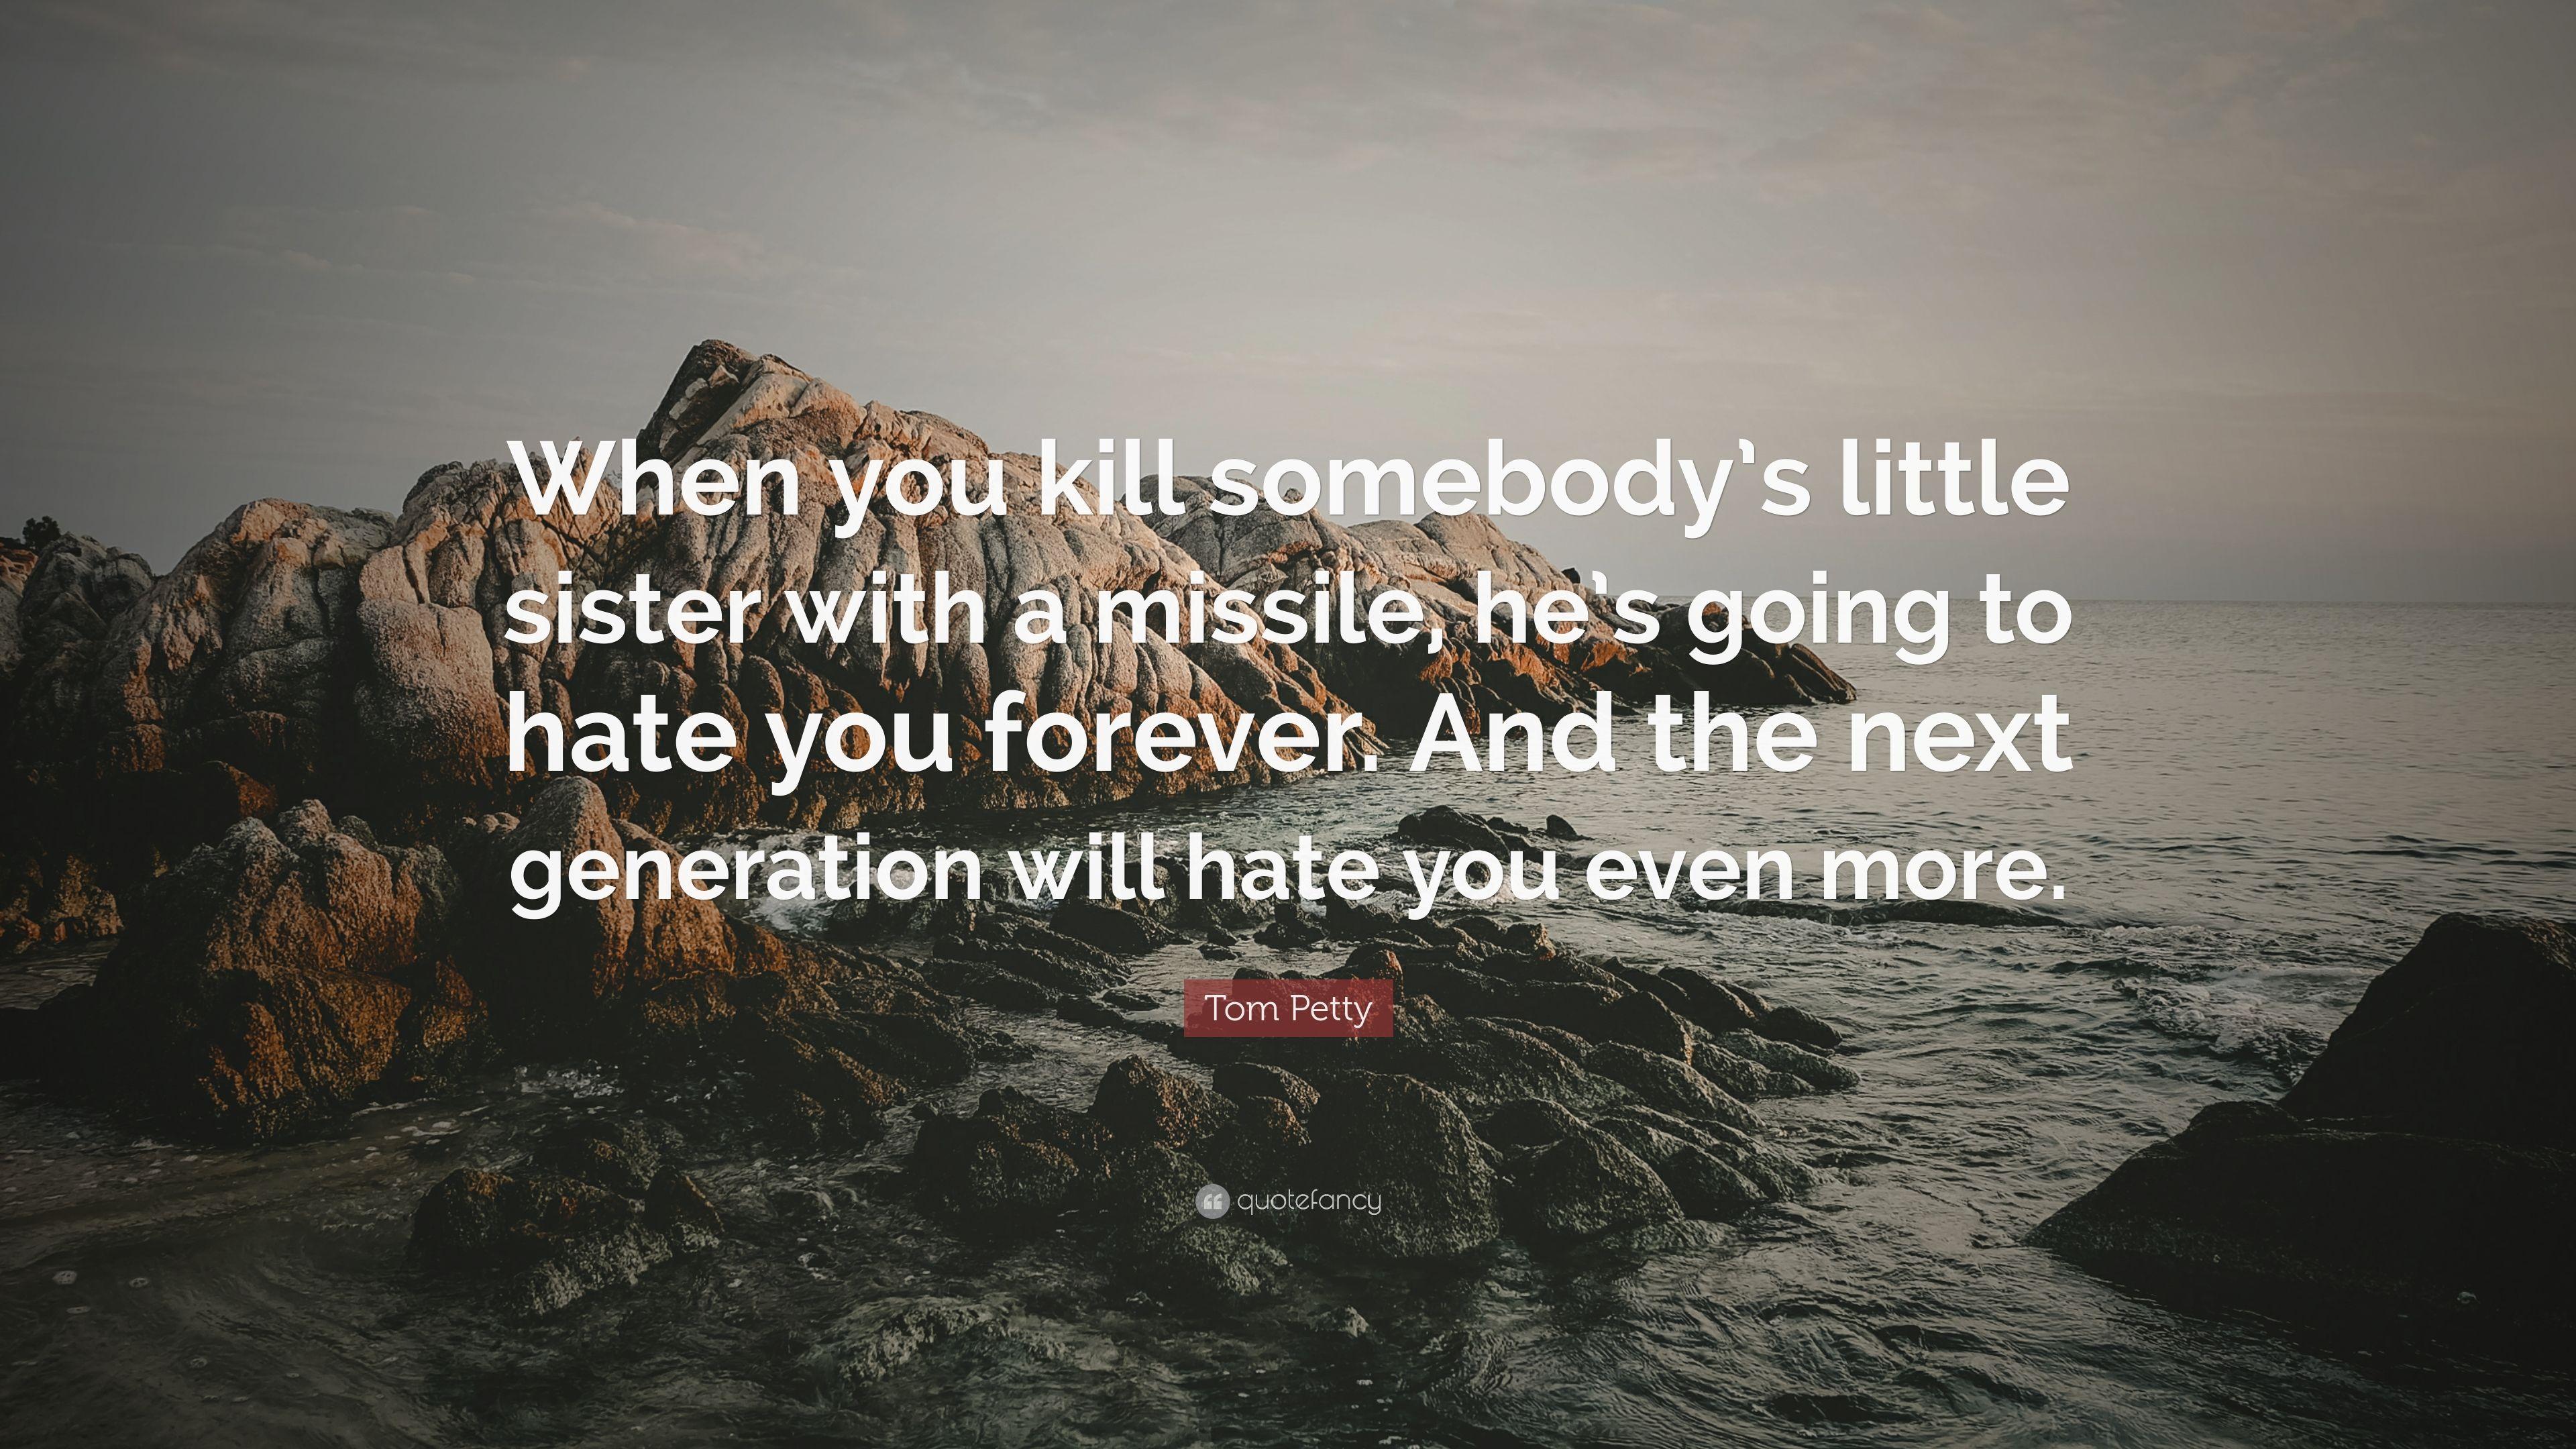 Tom Petty Quote: “When you kill somebody's little sister